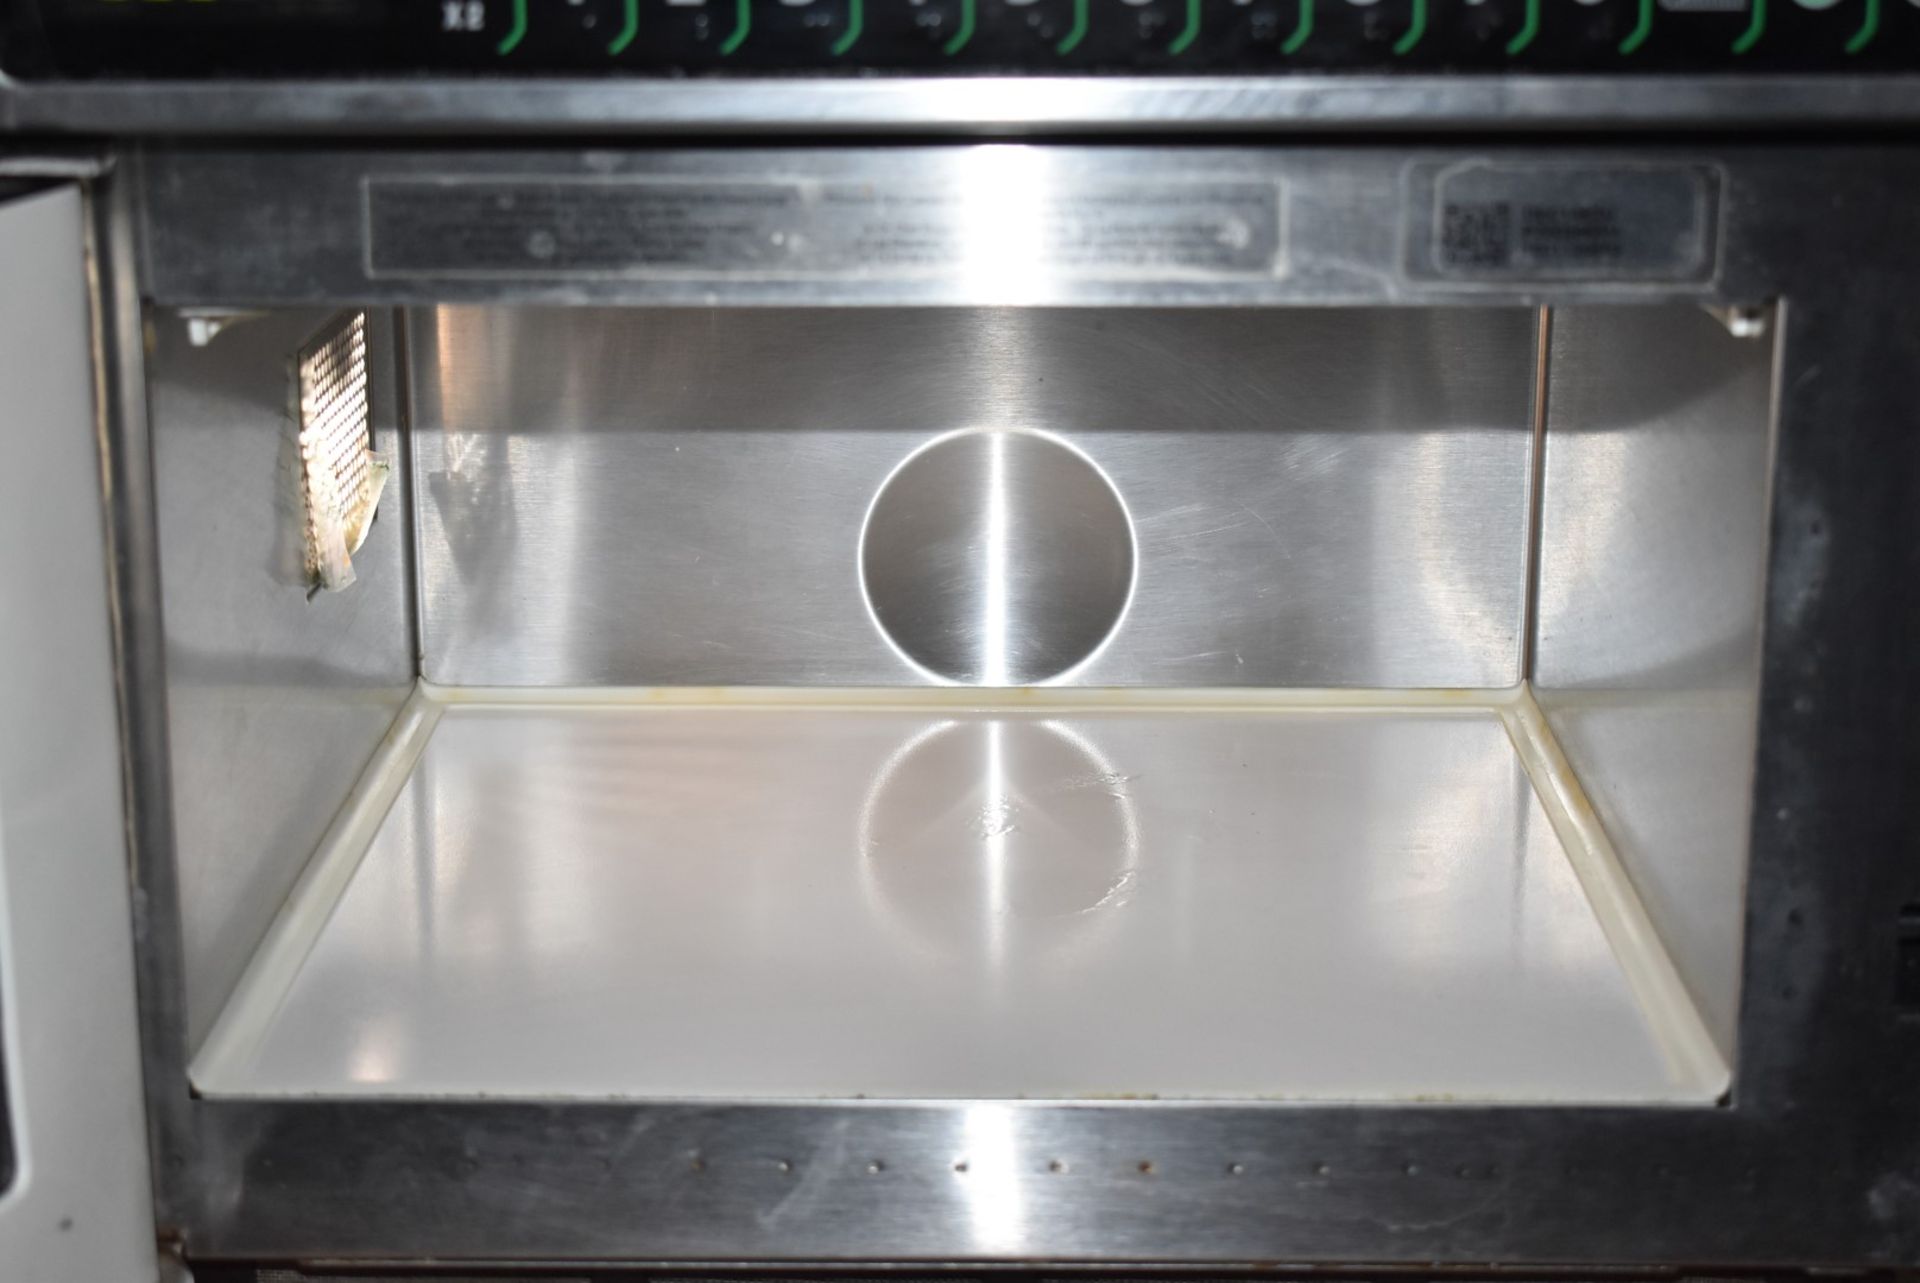 1 x Menumaster Commercial Microwave Oven - Model DEC14E2U - 1.4kW, 13A, 17Ltr - Recently Removed - Image 5 of 14